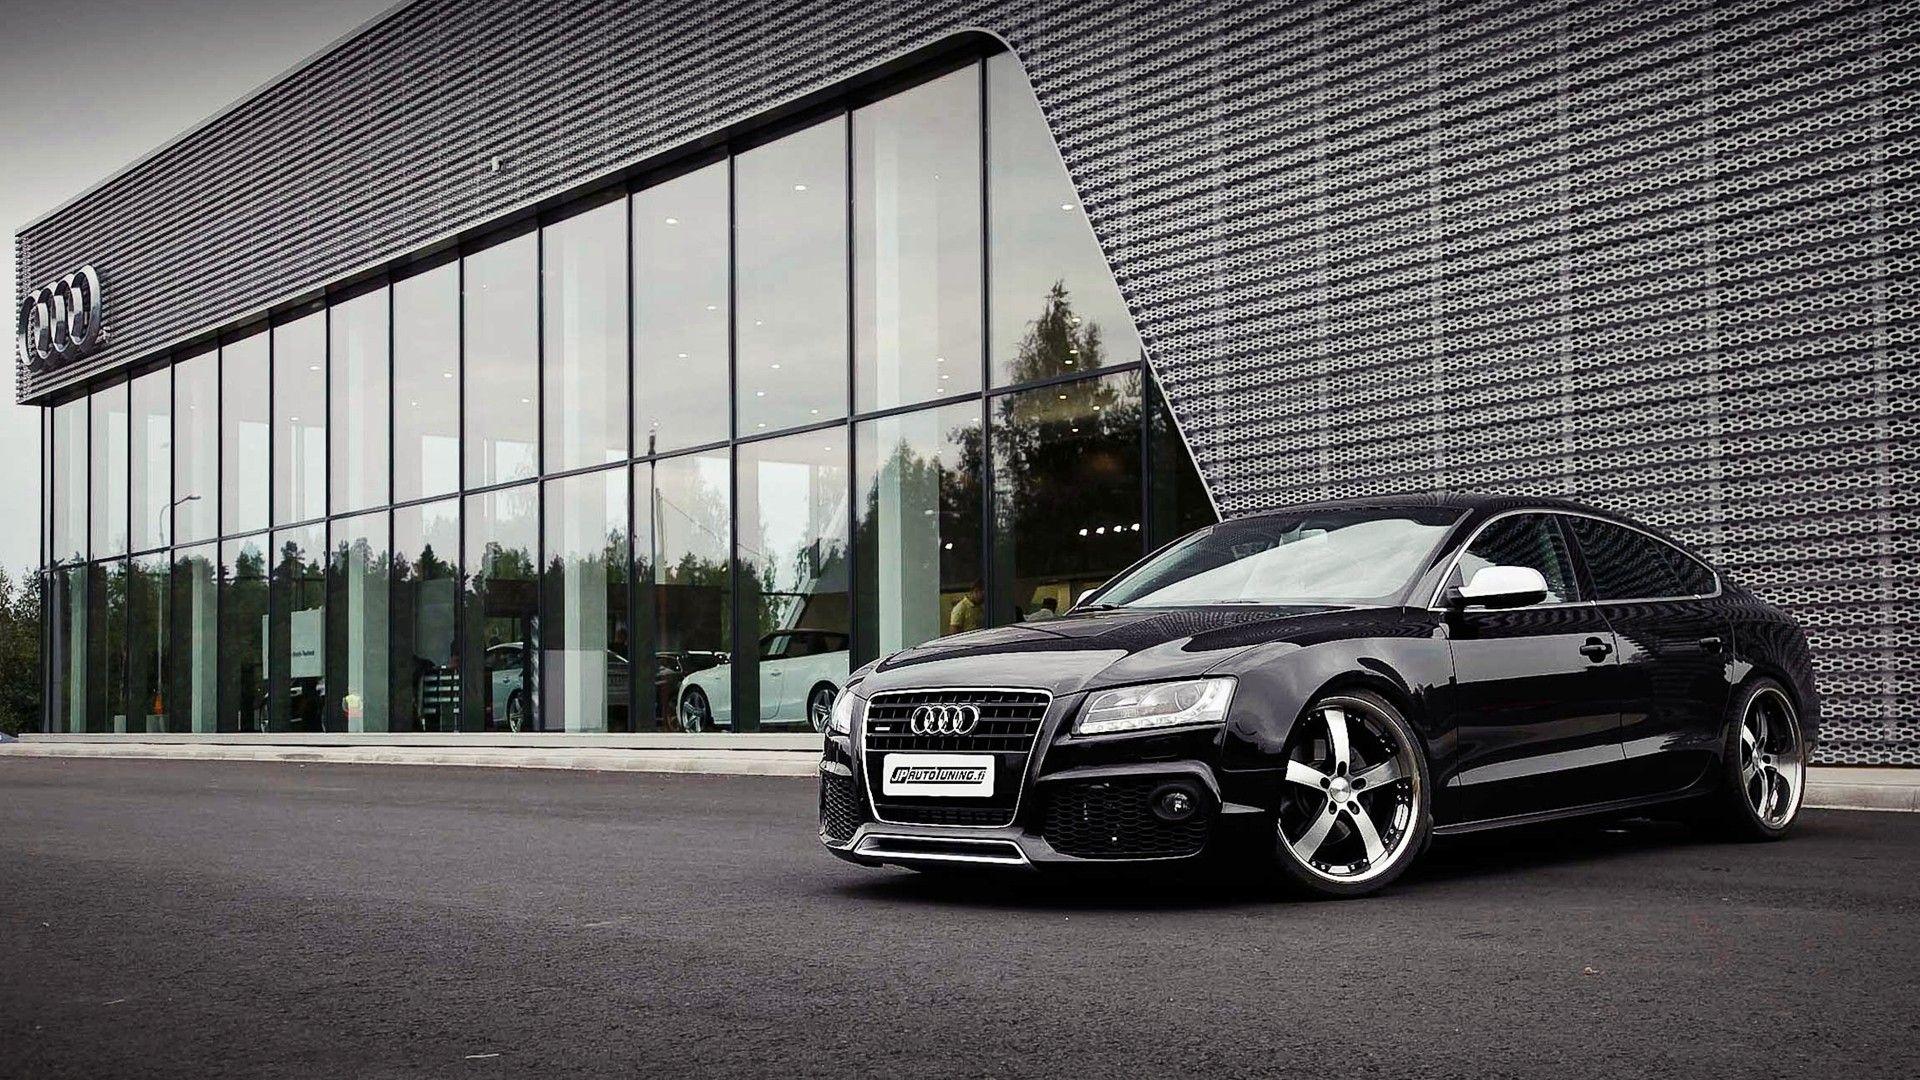 Audi Black And White Wallpapers Top Free Audi Black And White Images, Photos, Reviews